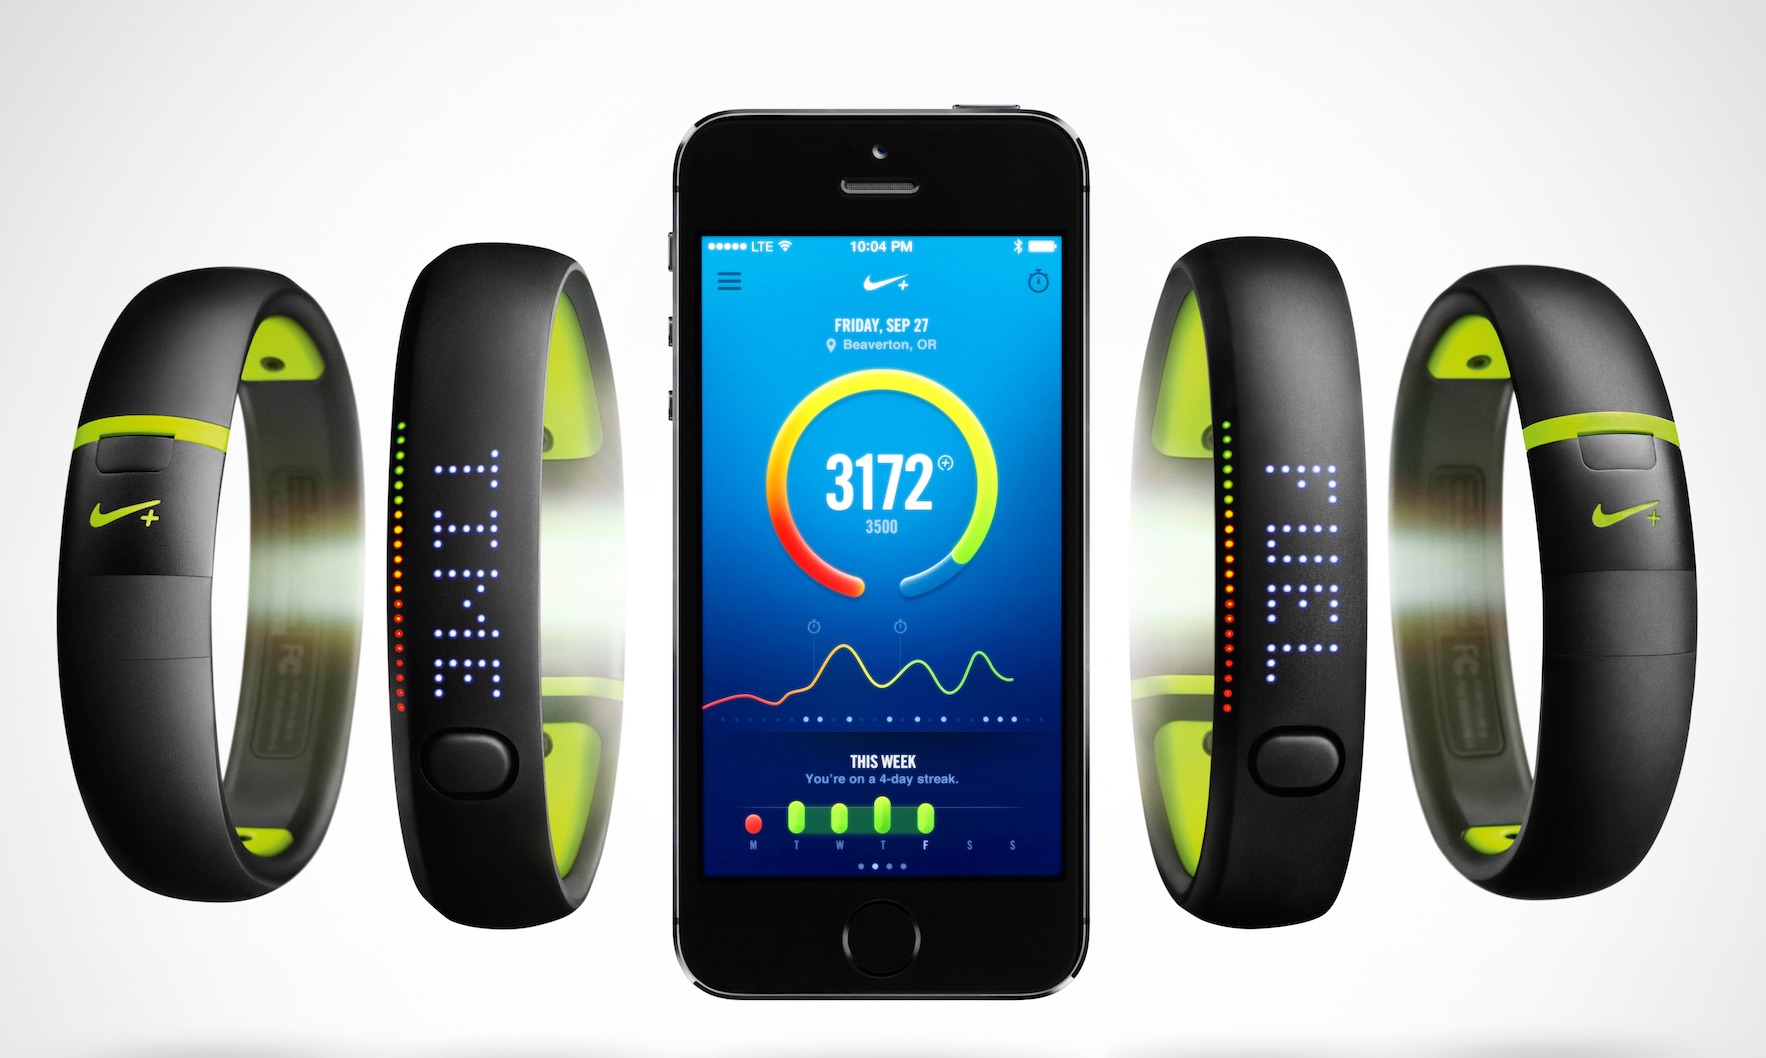 fuelband-se-announced-by-nike-with-improved-motion-and-sleep-tracking